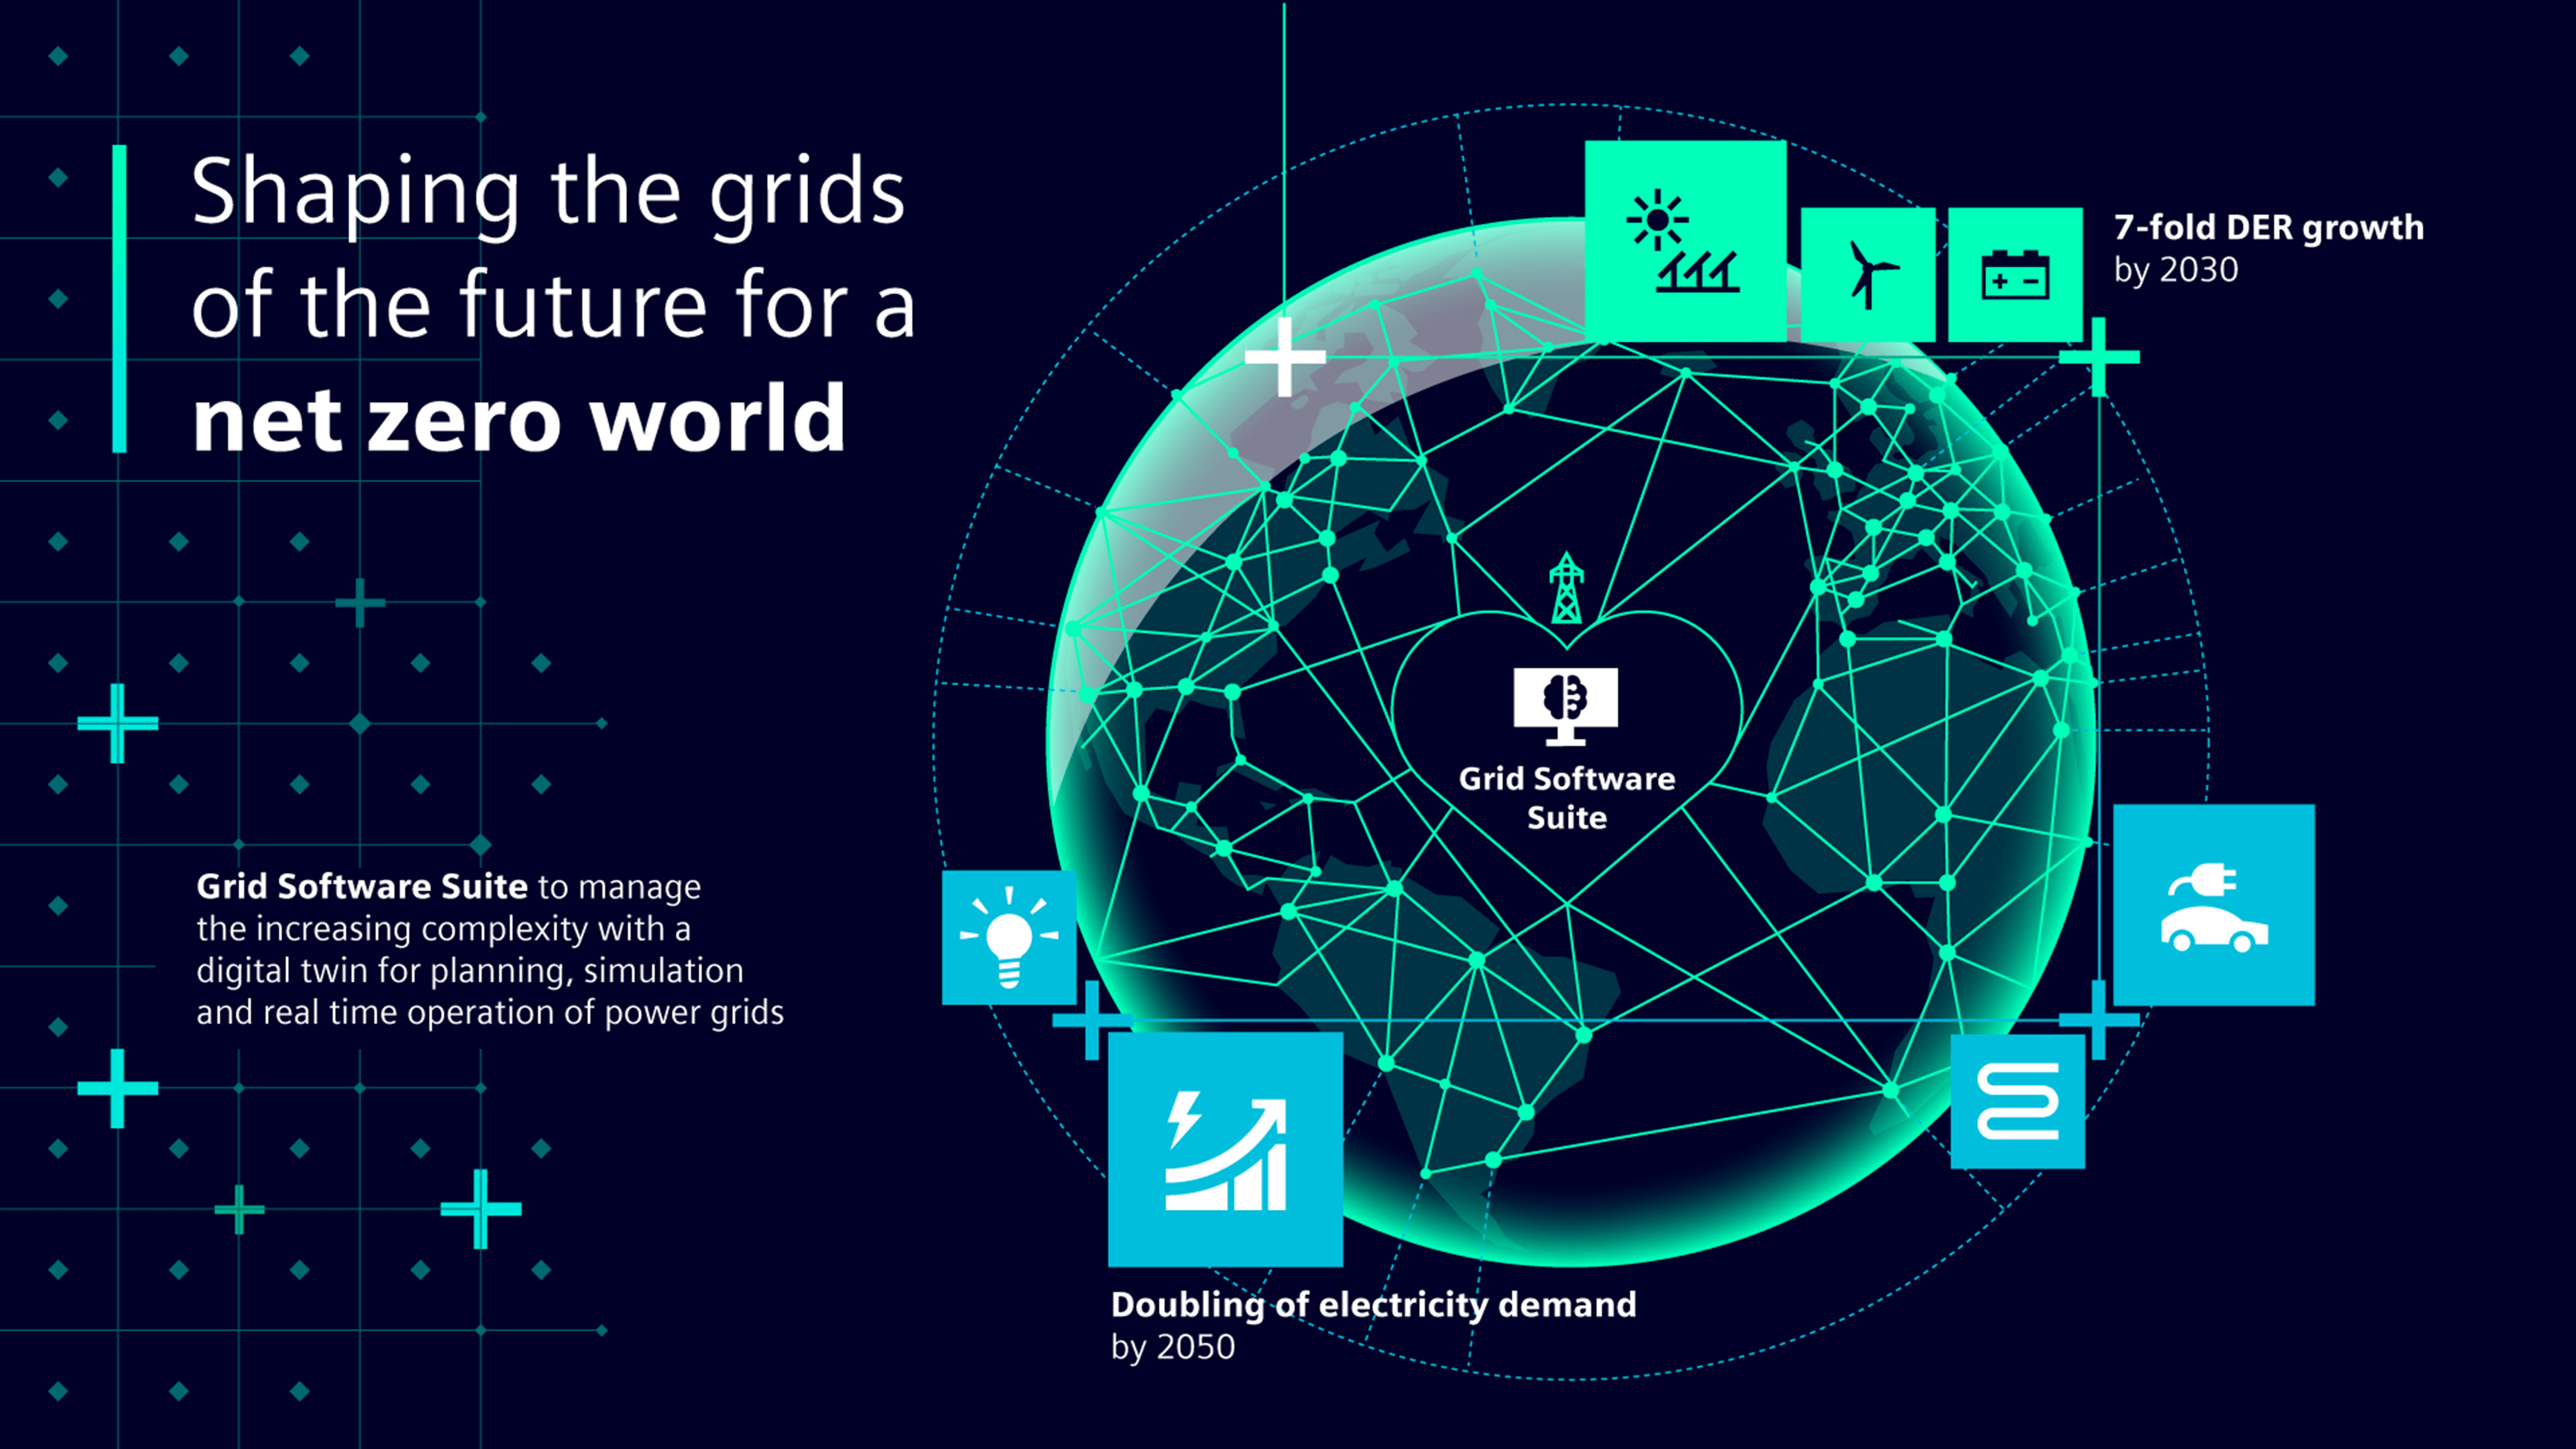 Siemens builds industry leading grid software suite for the net zero world, Press, Company